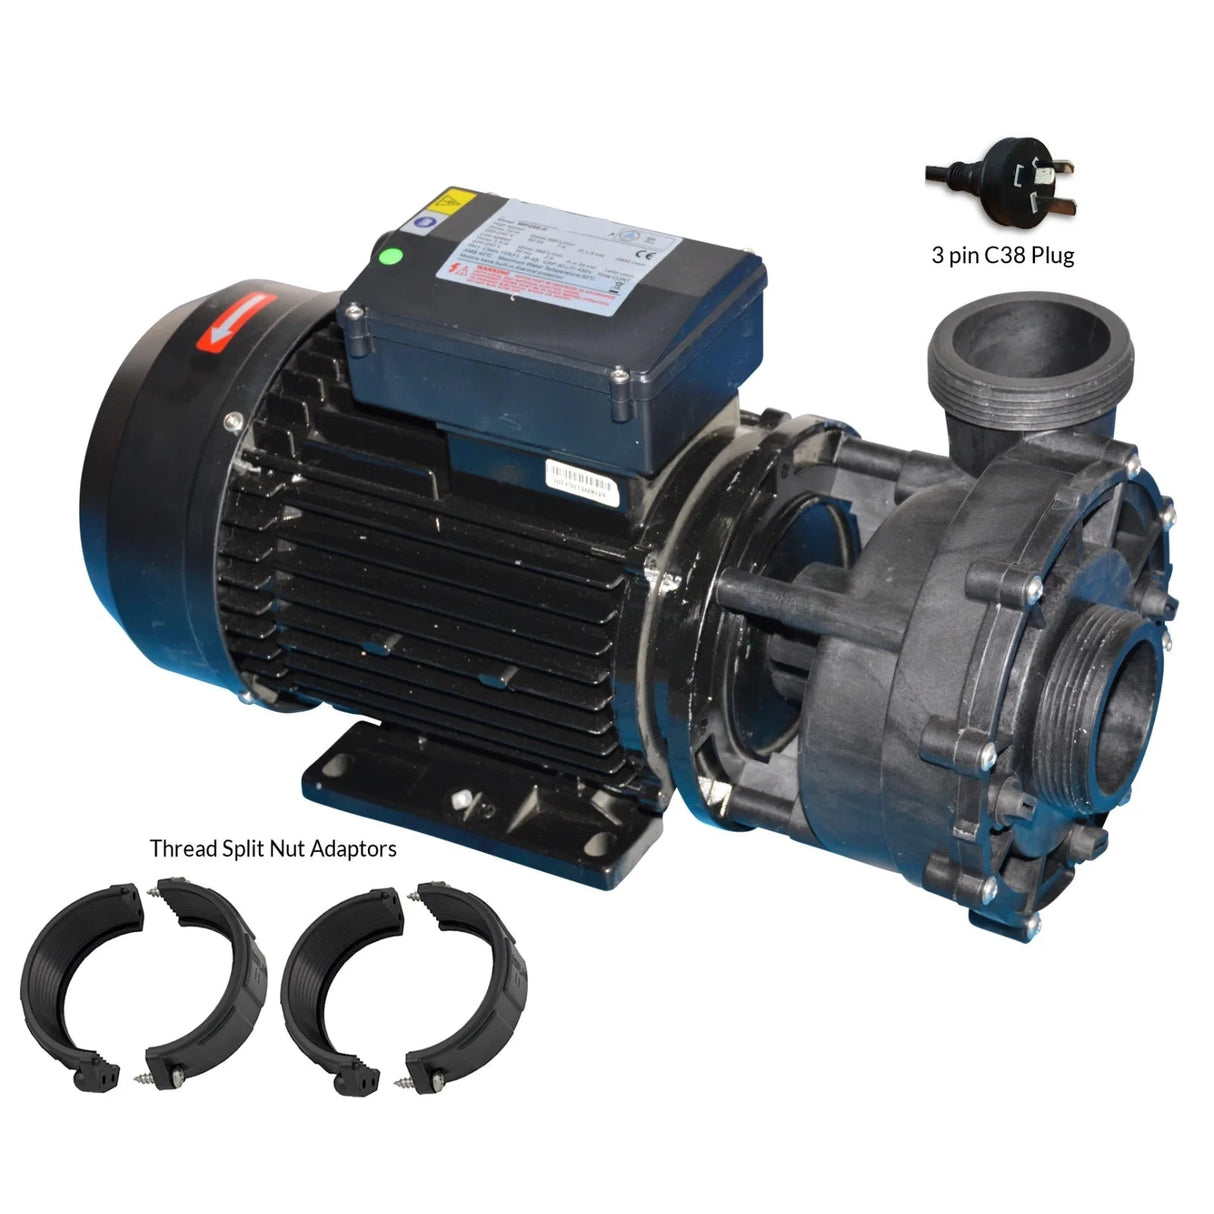 2.0 Hp Maxi-Flow Single Speed Spa Pump Replacement - Q6883 / A7134075 A7134110 2.0Hp 1-Speed W/ C38